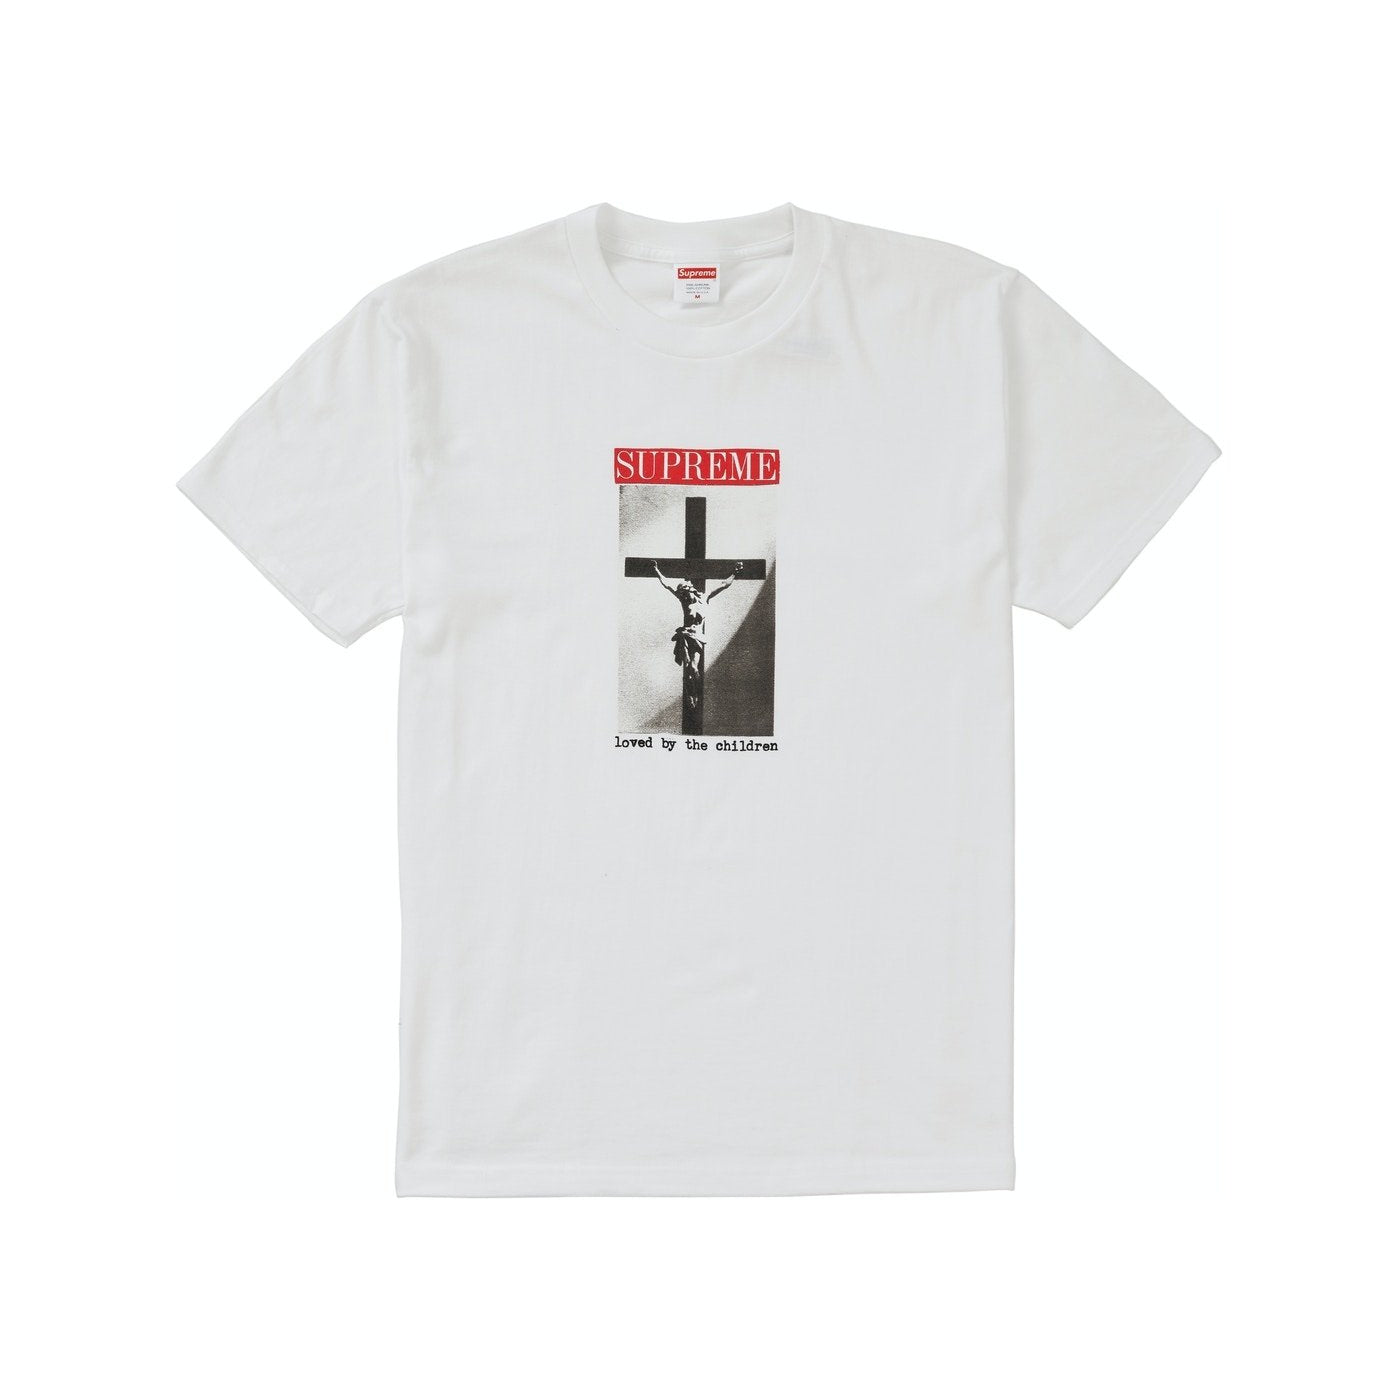 Supreme Loved By The Children Tee White SS20 - Centrall Online